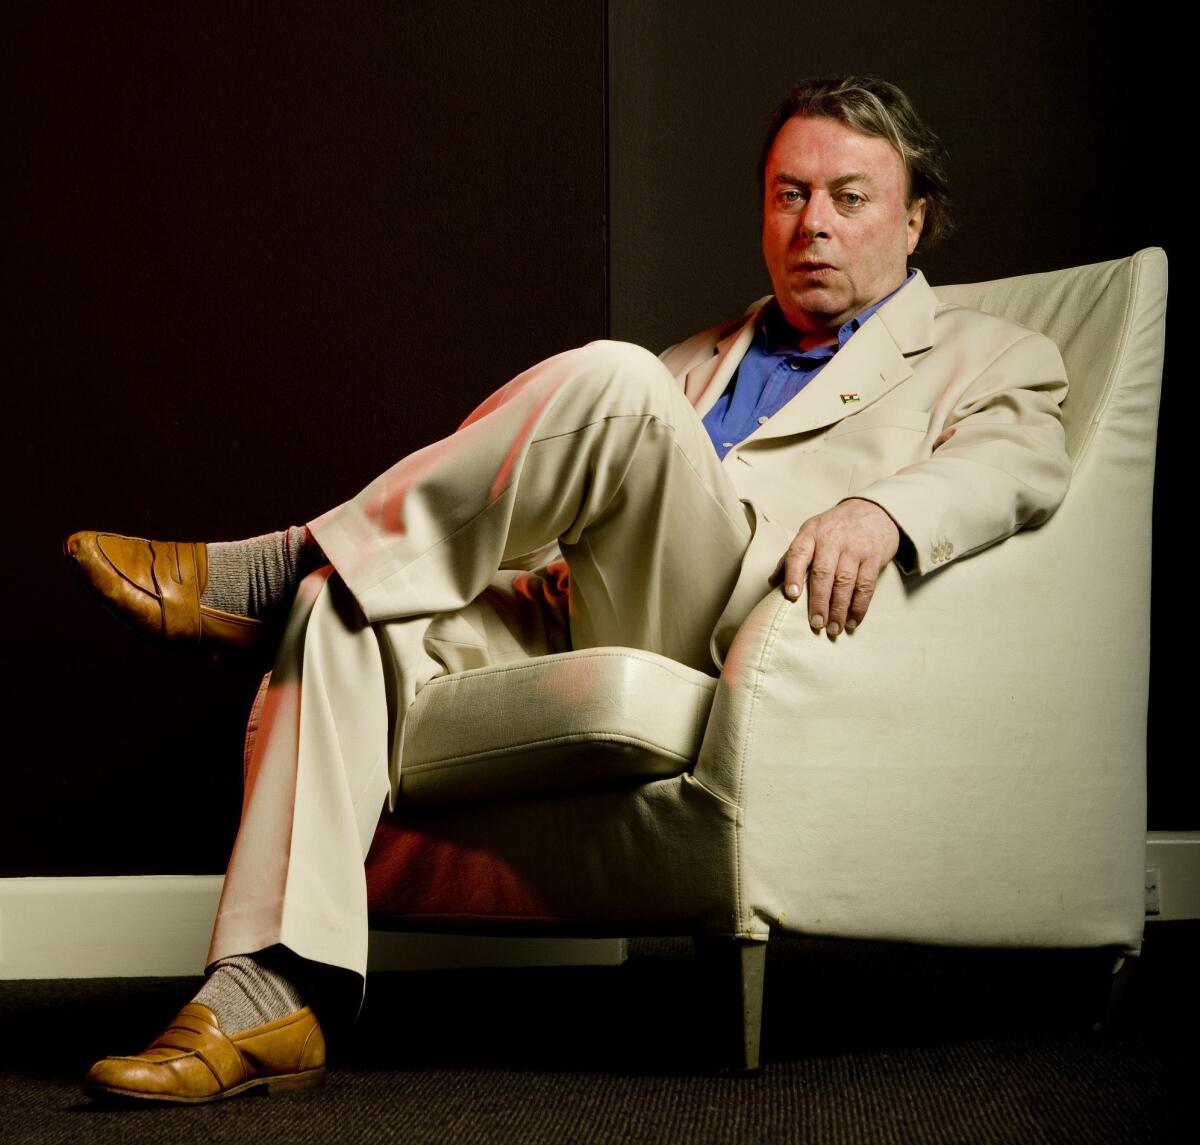 Author Christopher Hitchens in 2010. His influential book "God Is Not Great: How Religion Poisons Everything" was published in 2007.